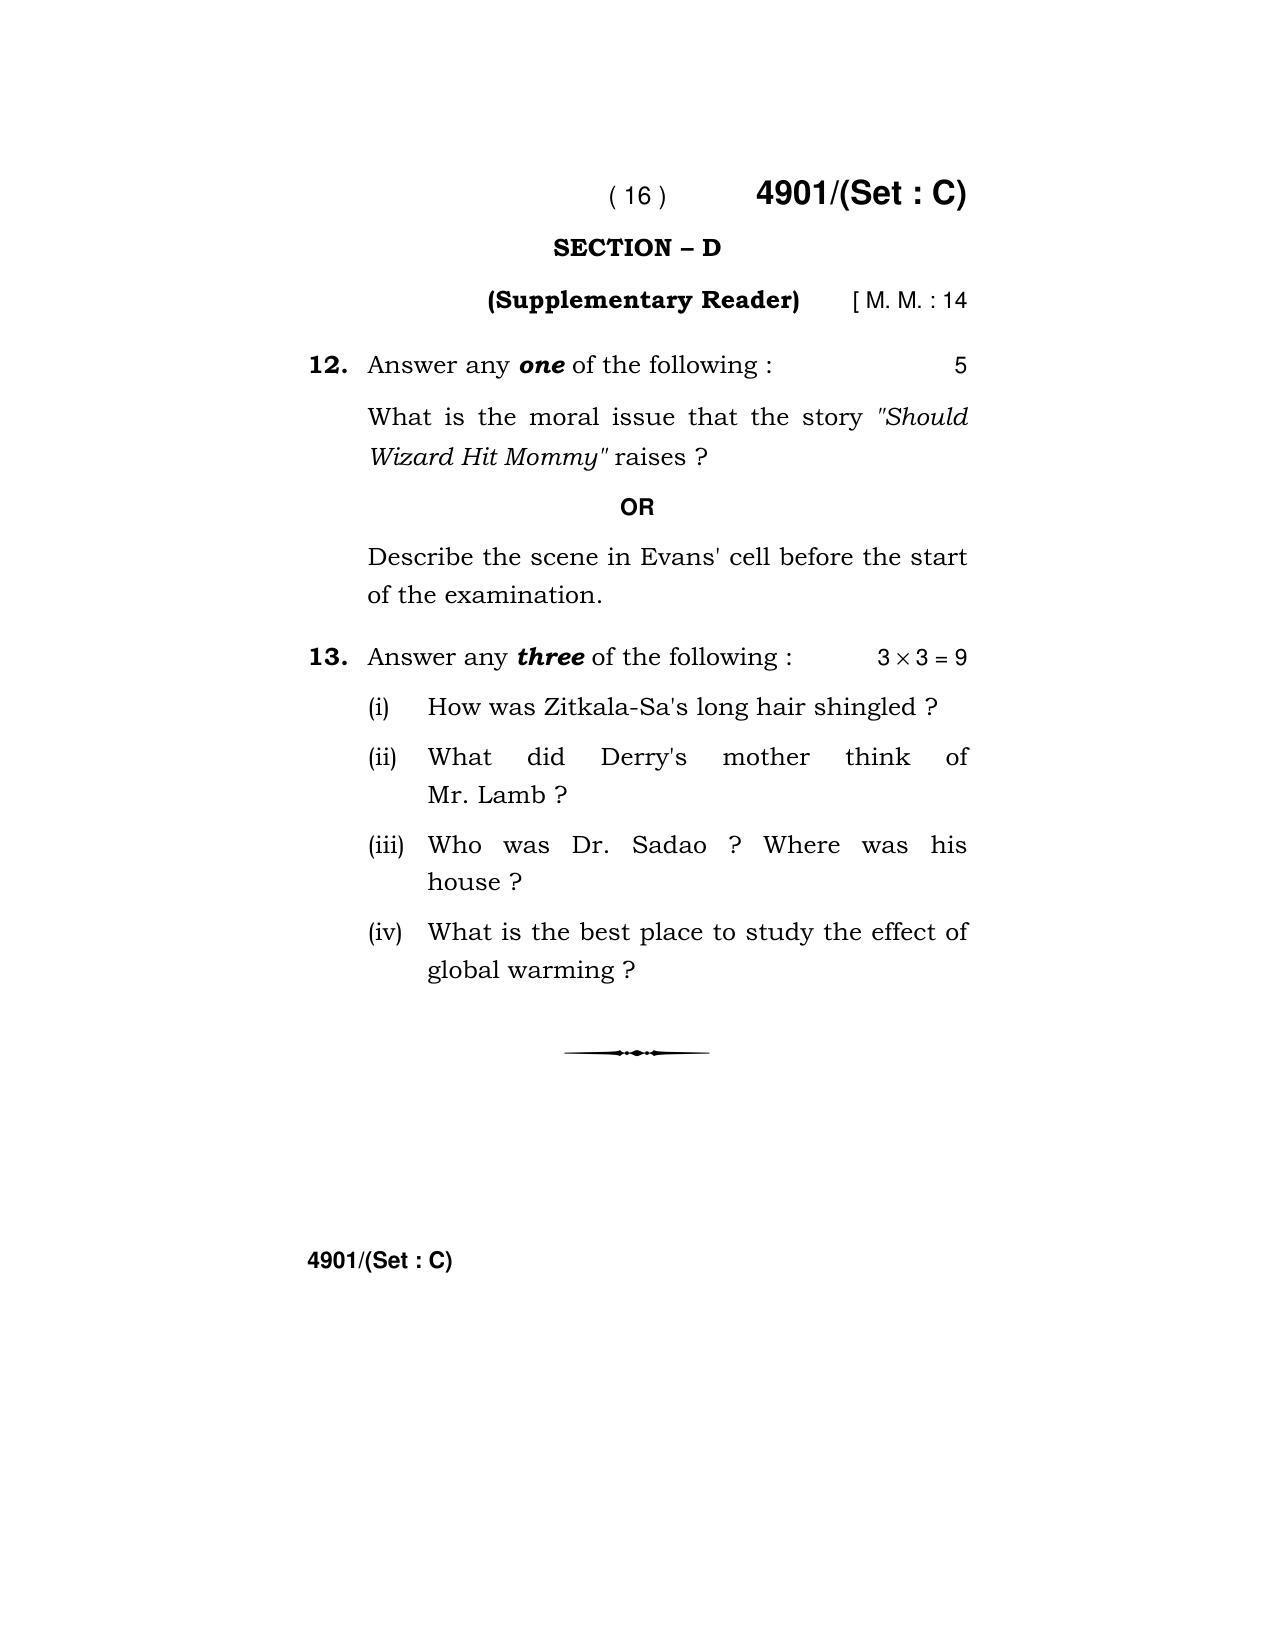 Haryana Board HBSE Class 12 English Core 2020 Question Paper - Page 48